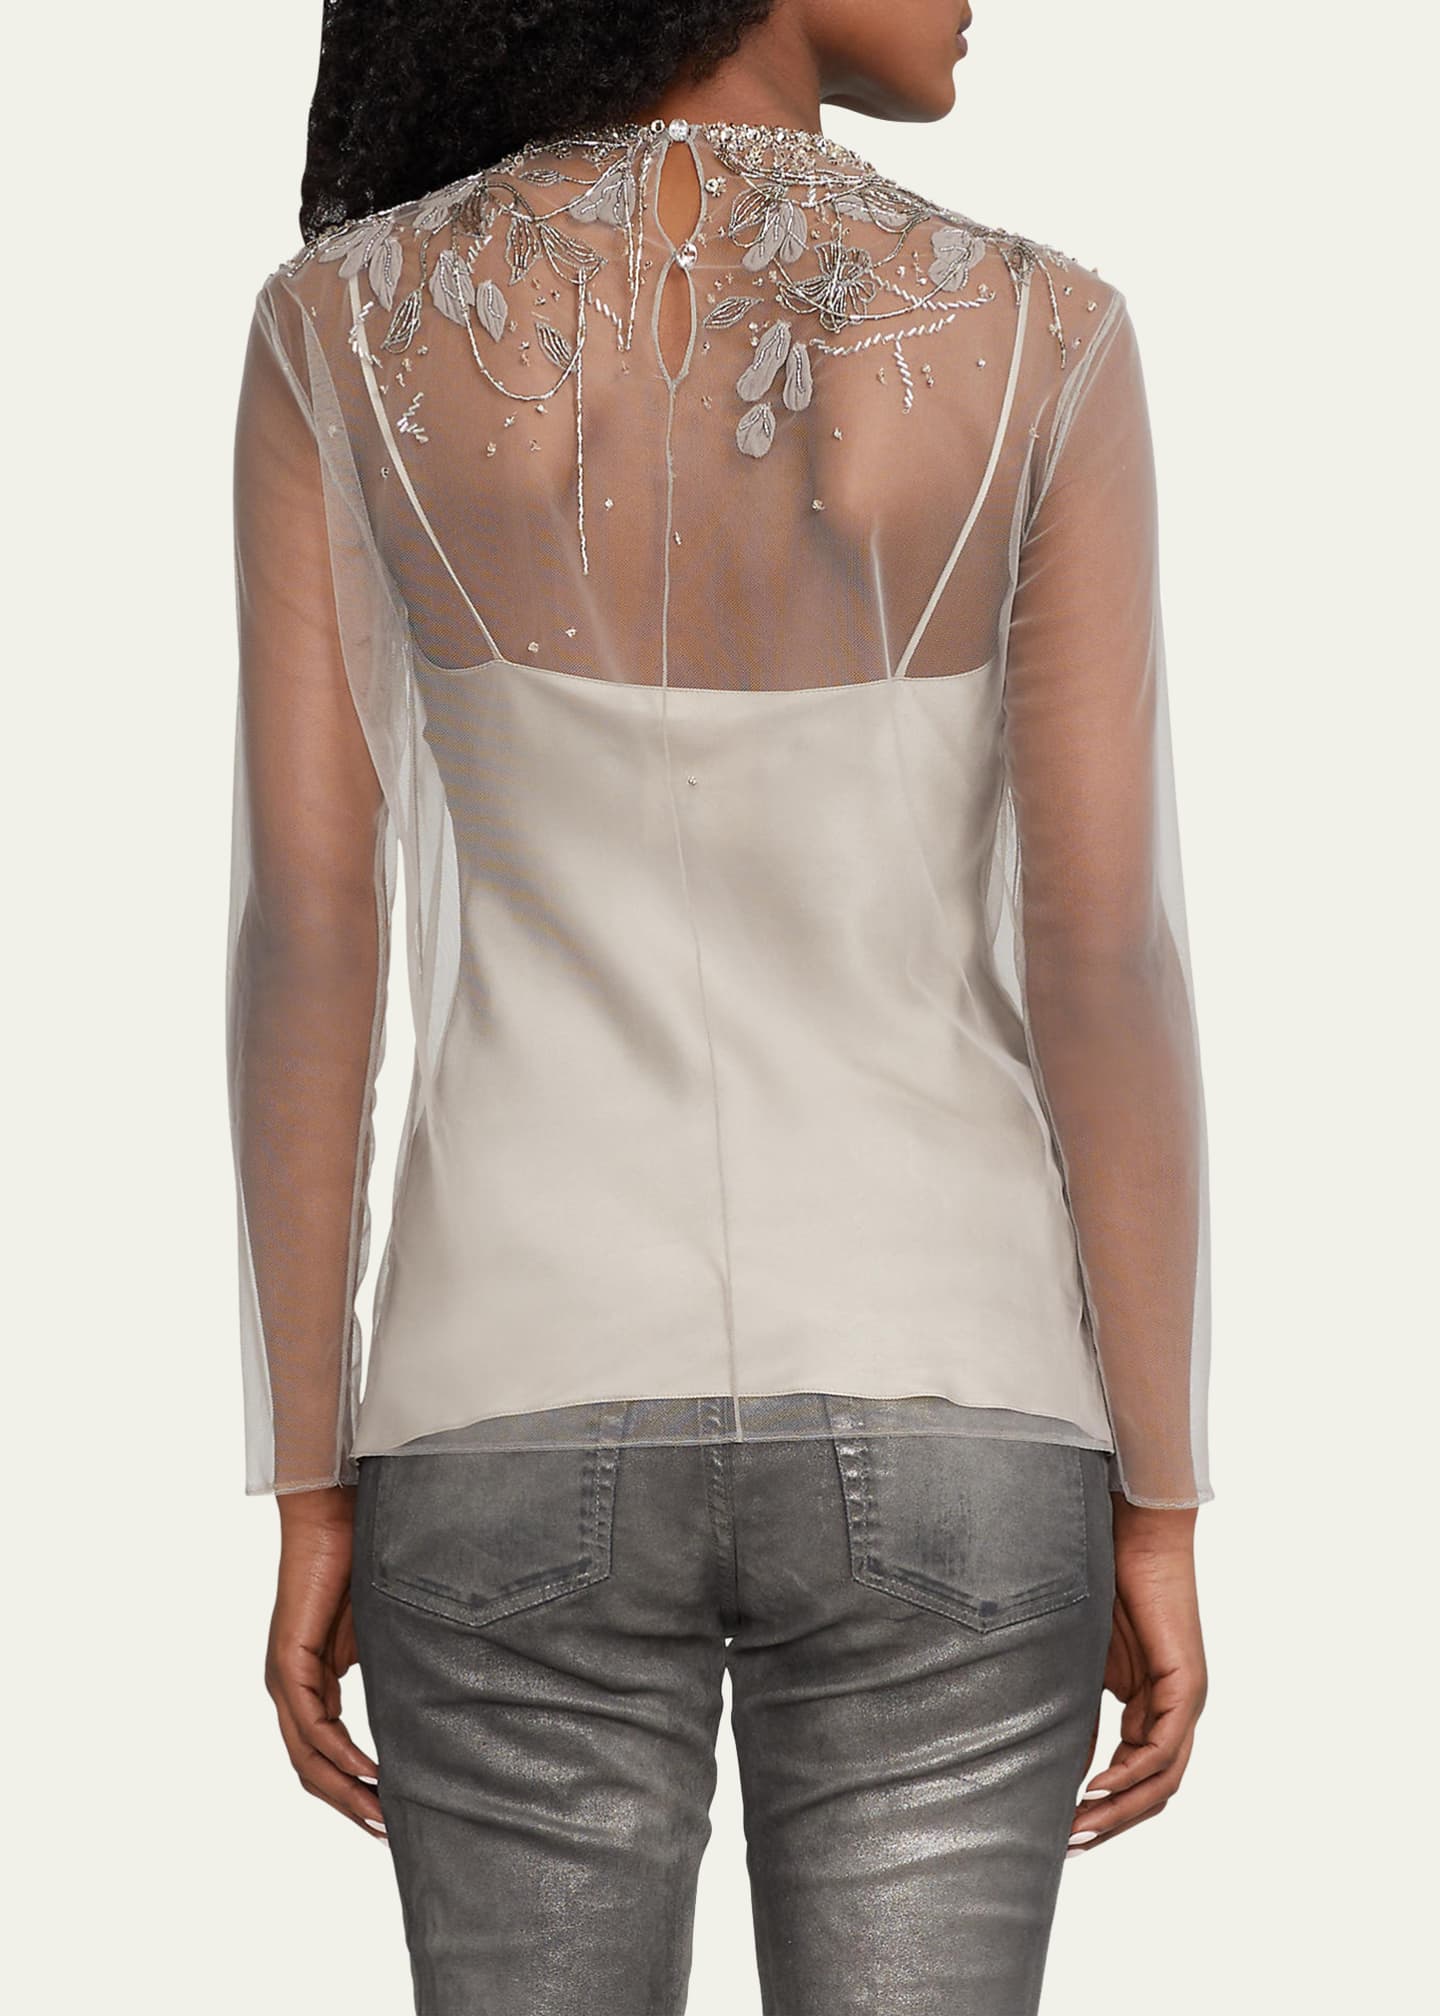 Ralph Lauren Collection Fiorenzo Embellished Tulle Top